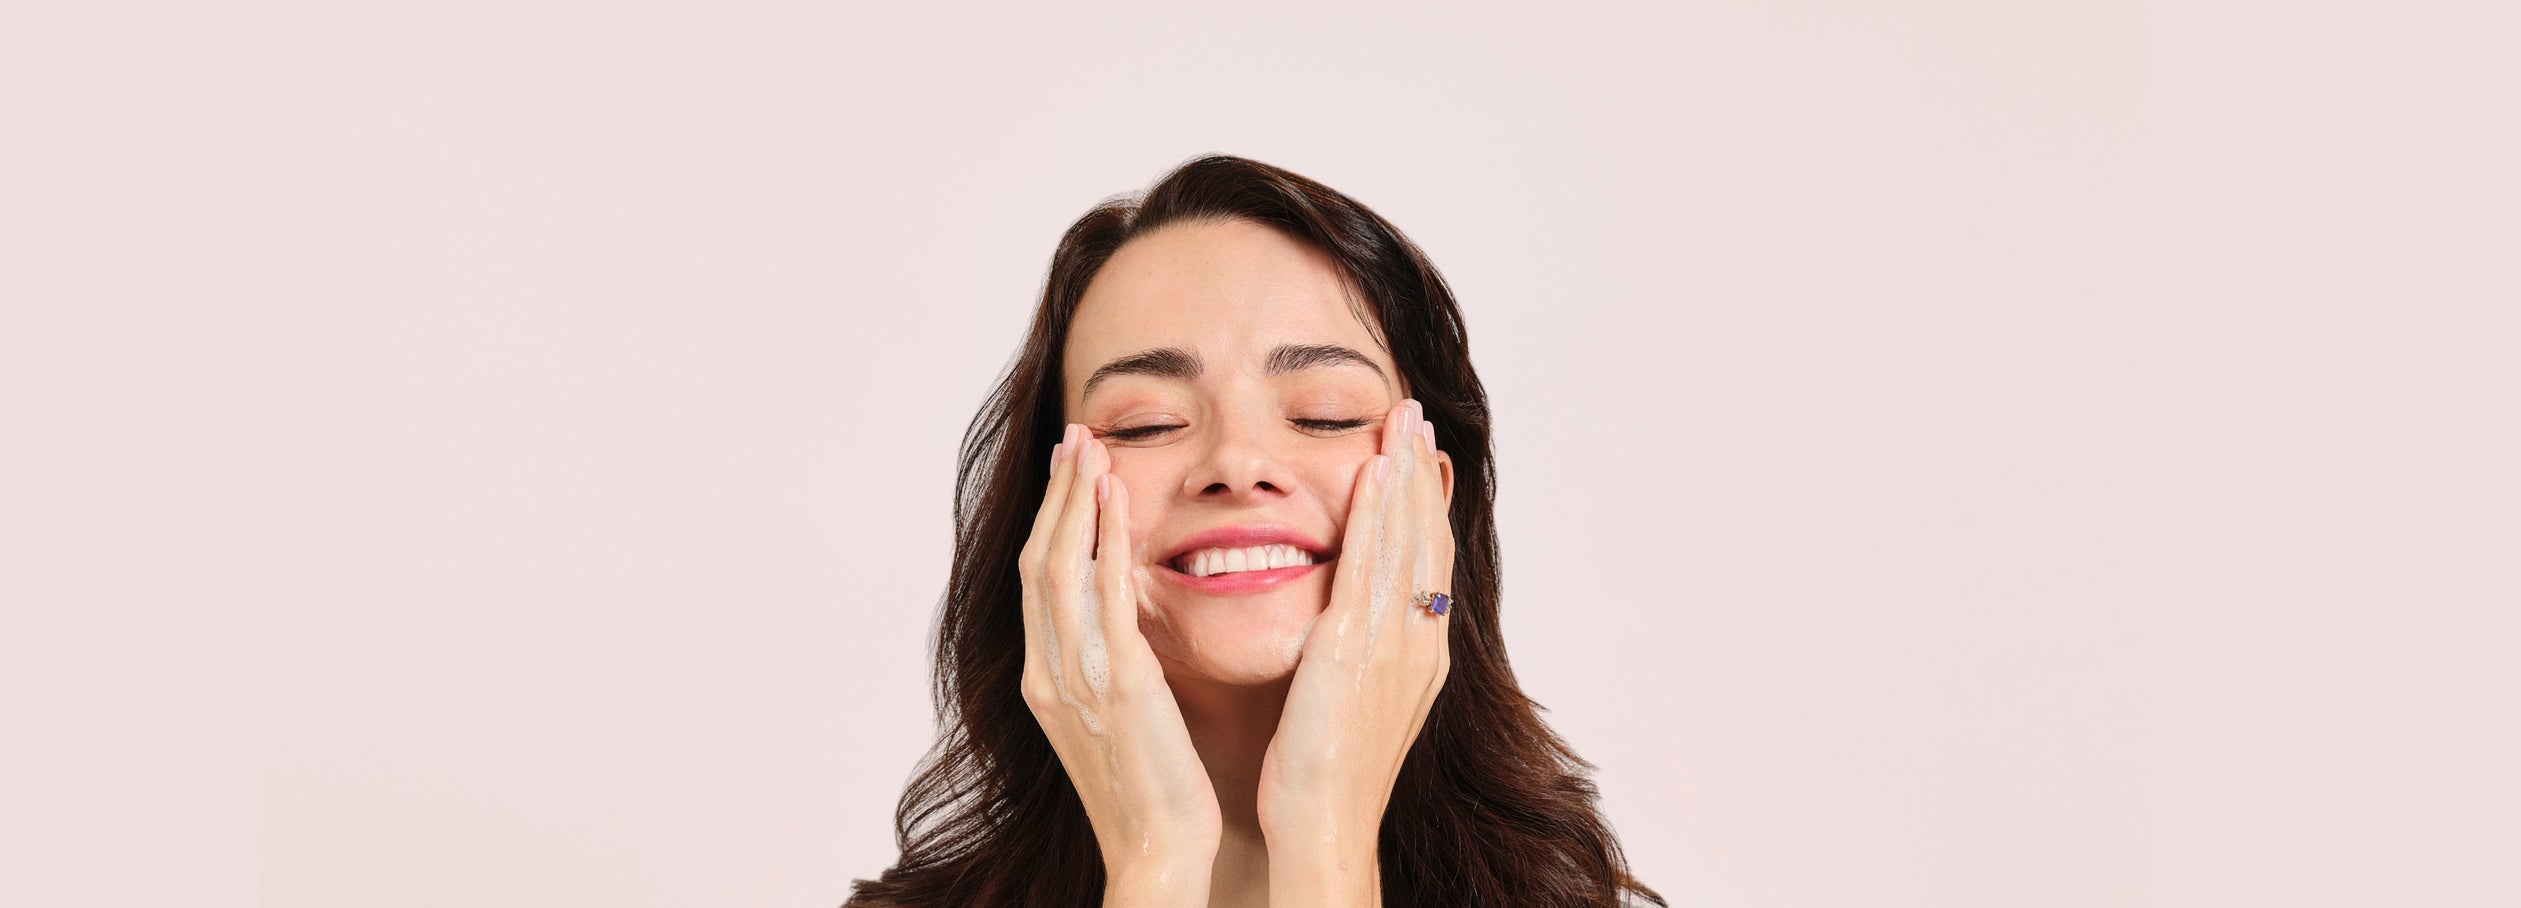 woman washing face with hands on cheeks